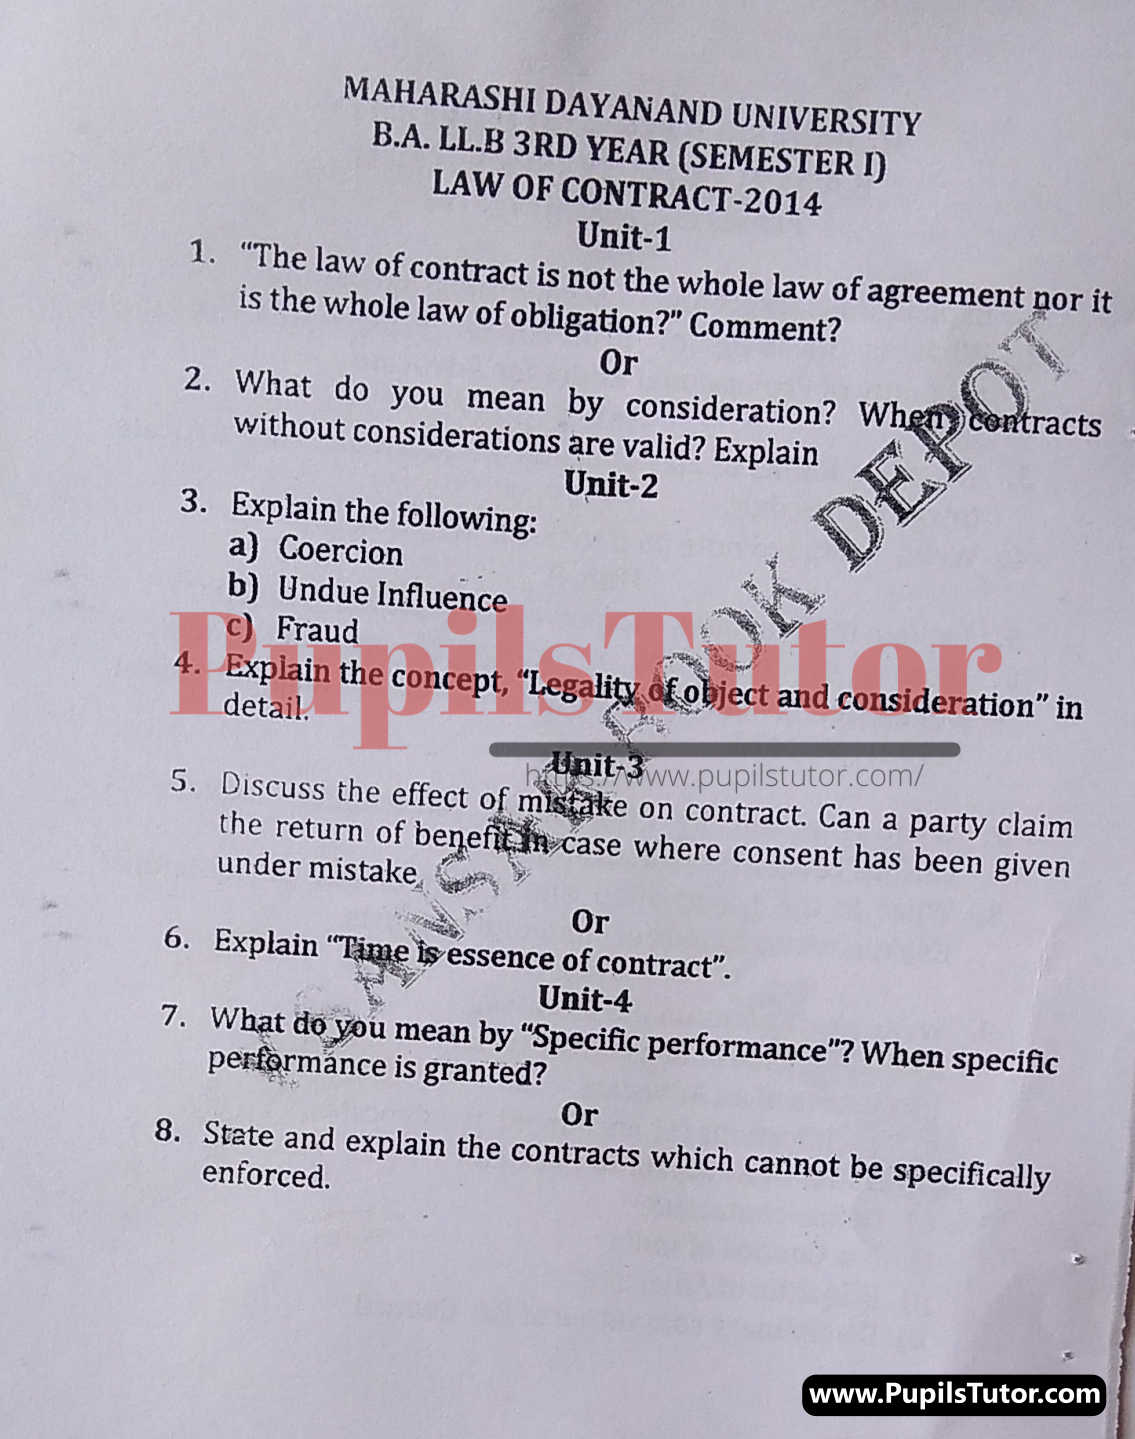 MDU (Maharshi Dayanand University, Rohtak Haryana) LLB Regular Exam (Hons.) First Semester Previous Year Law Of Contract Question Paper For 2014 Exam (Question Paper Page 1) - pupilstutor.com